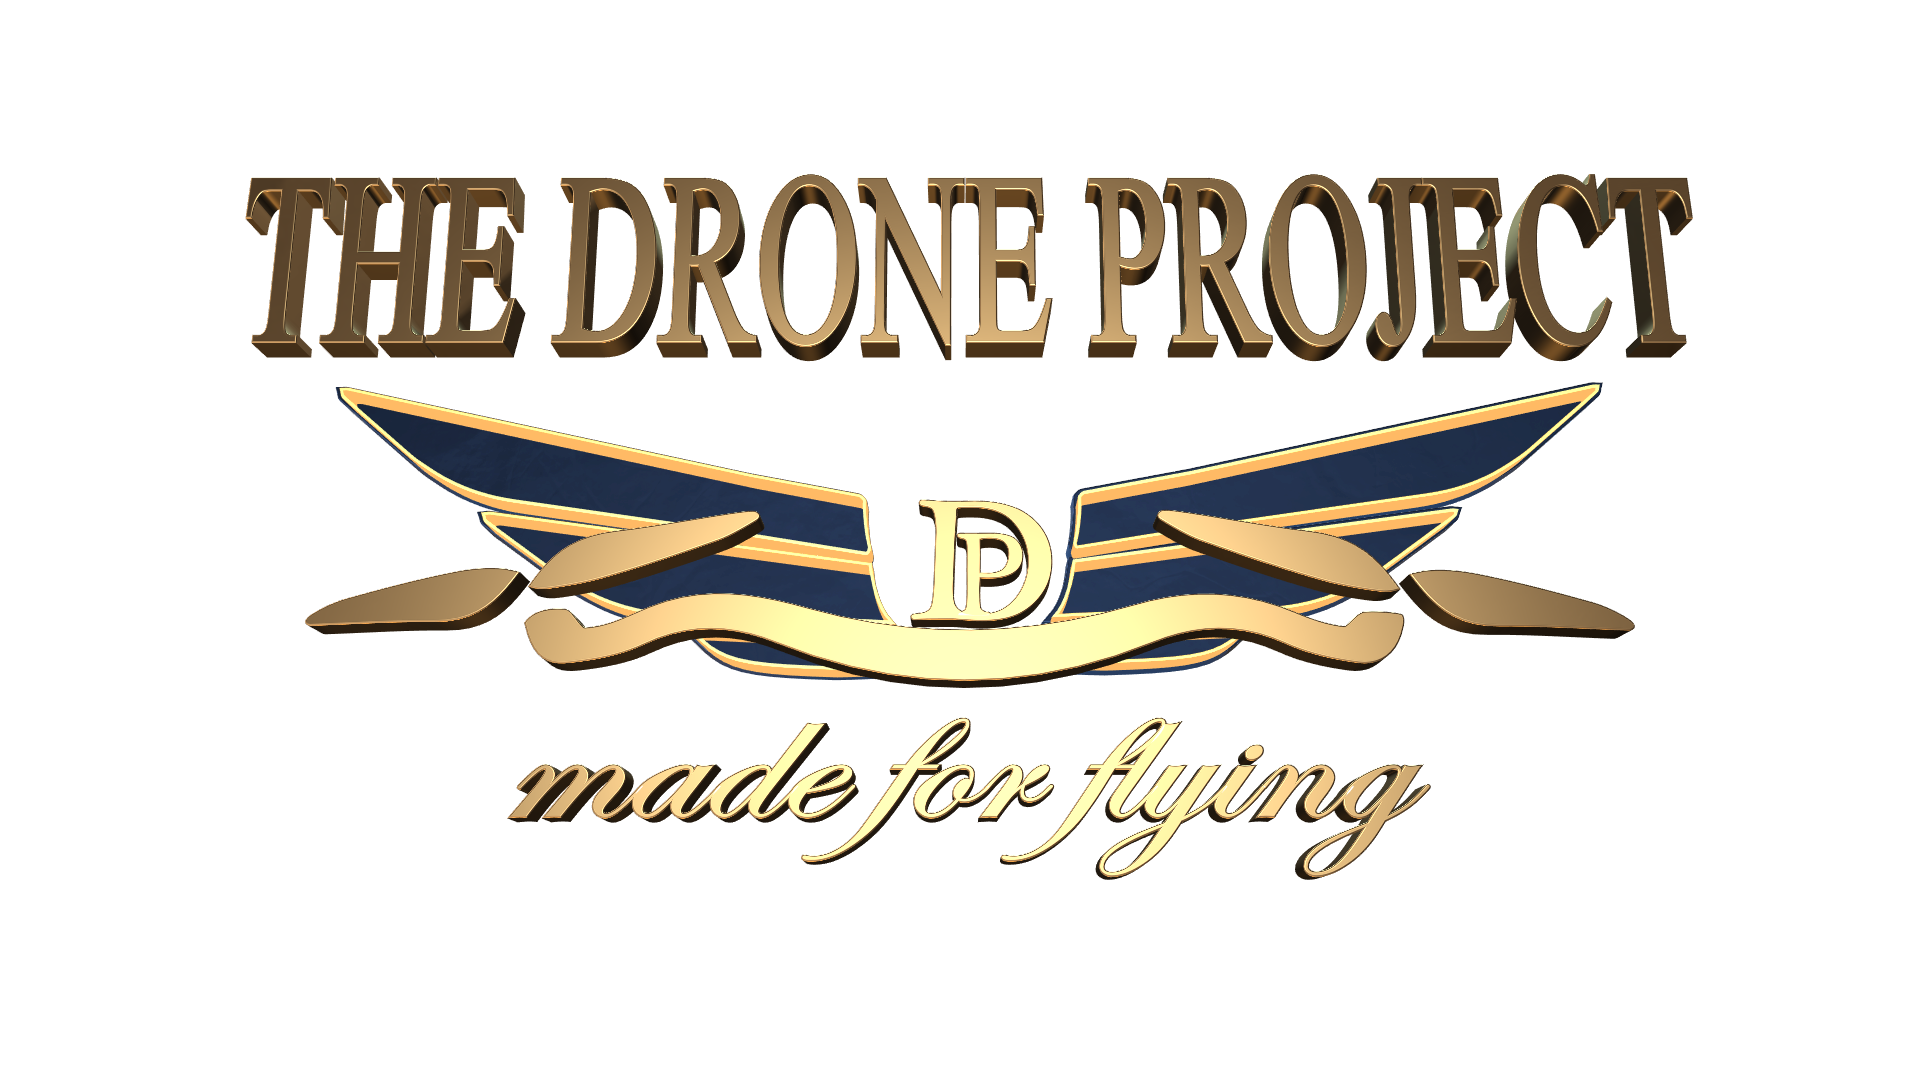 The Drone Project S.A. logo